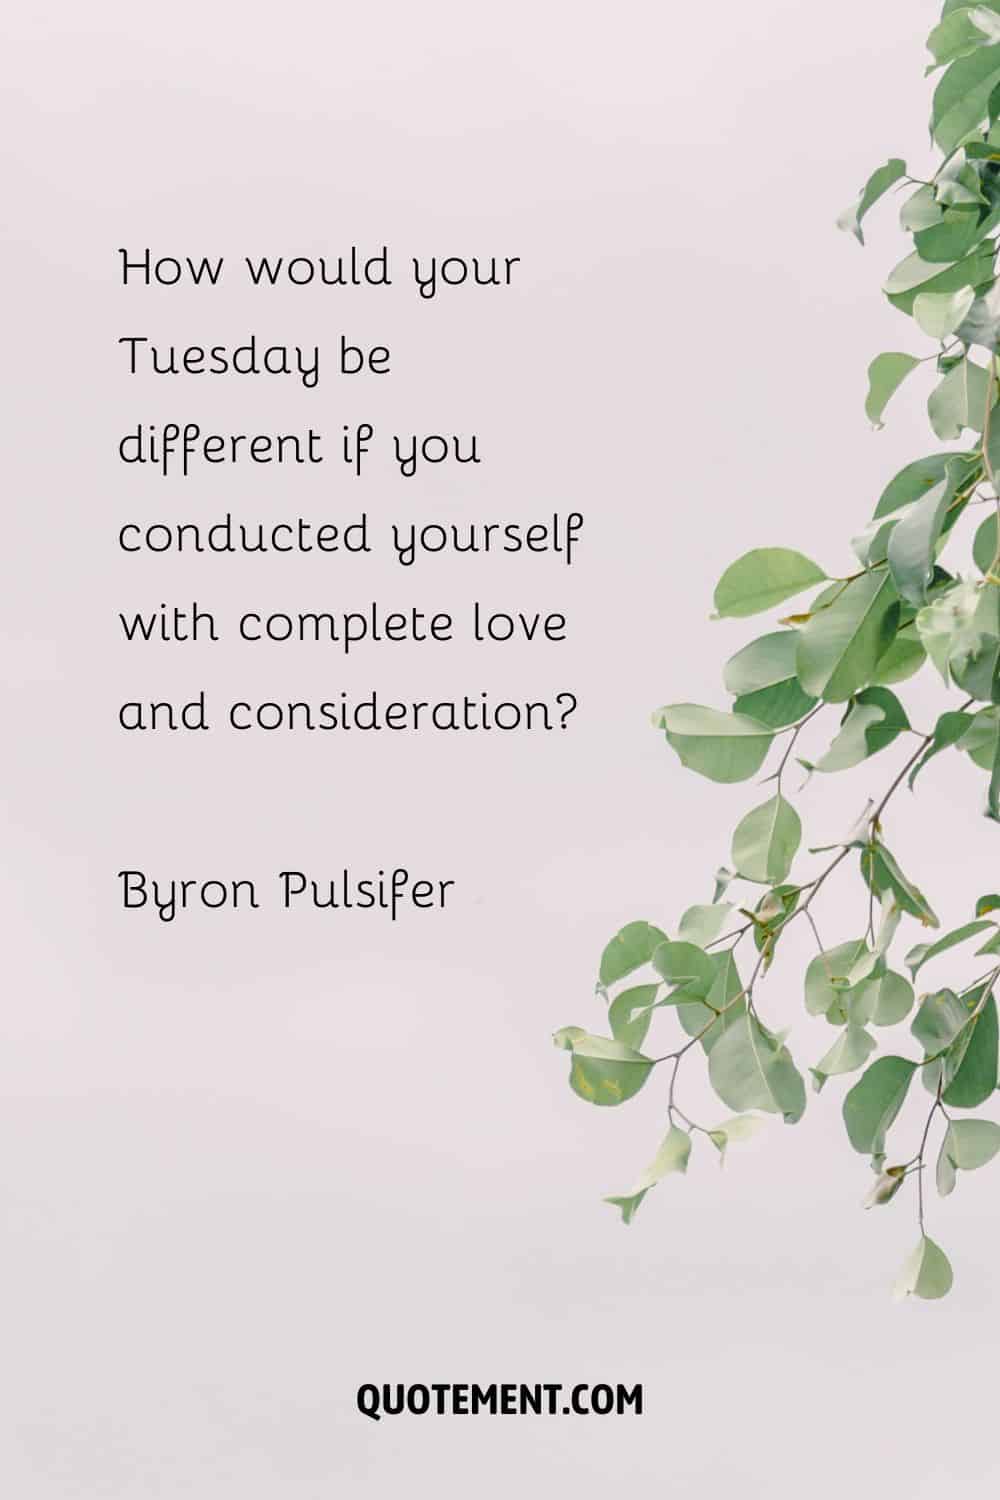 “How would your Tuesday be different if you conducted yourself with complete love and consideration” — Byron Pulsifer